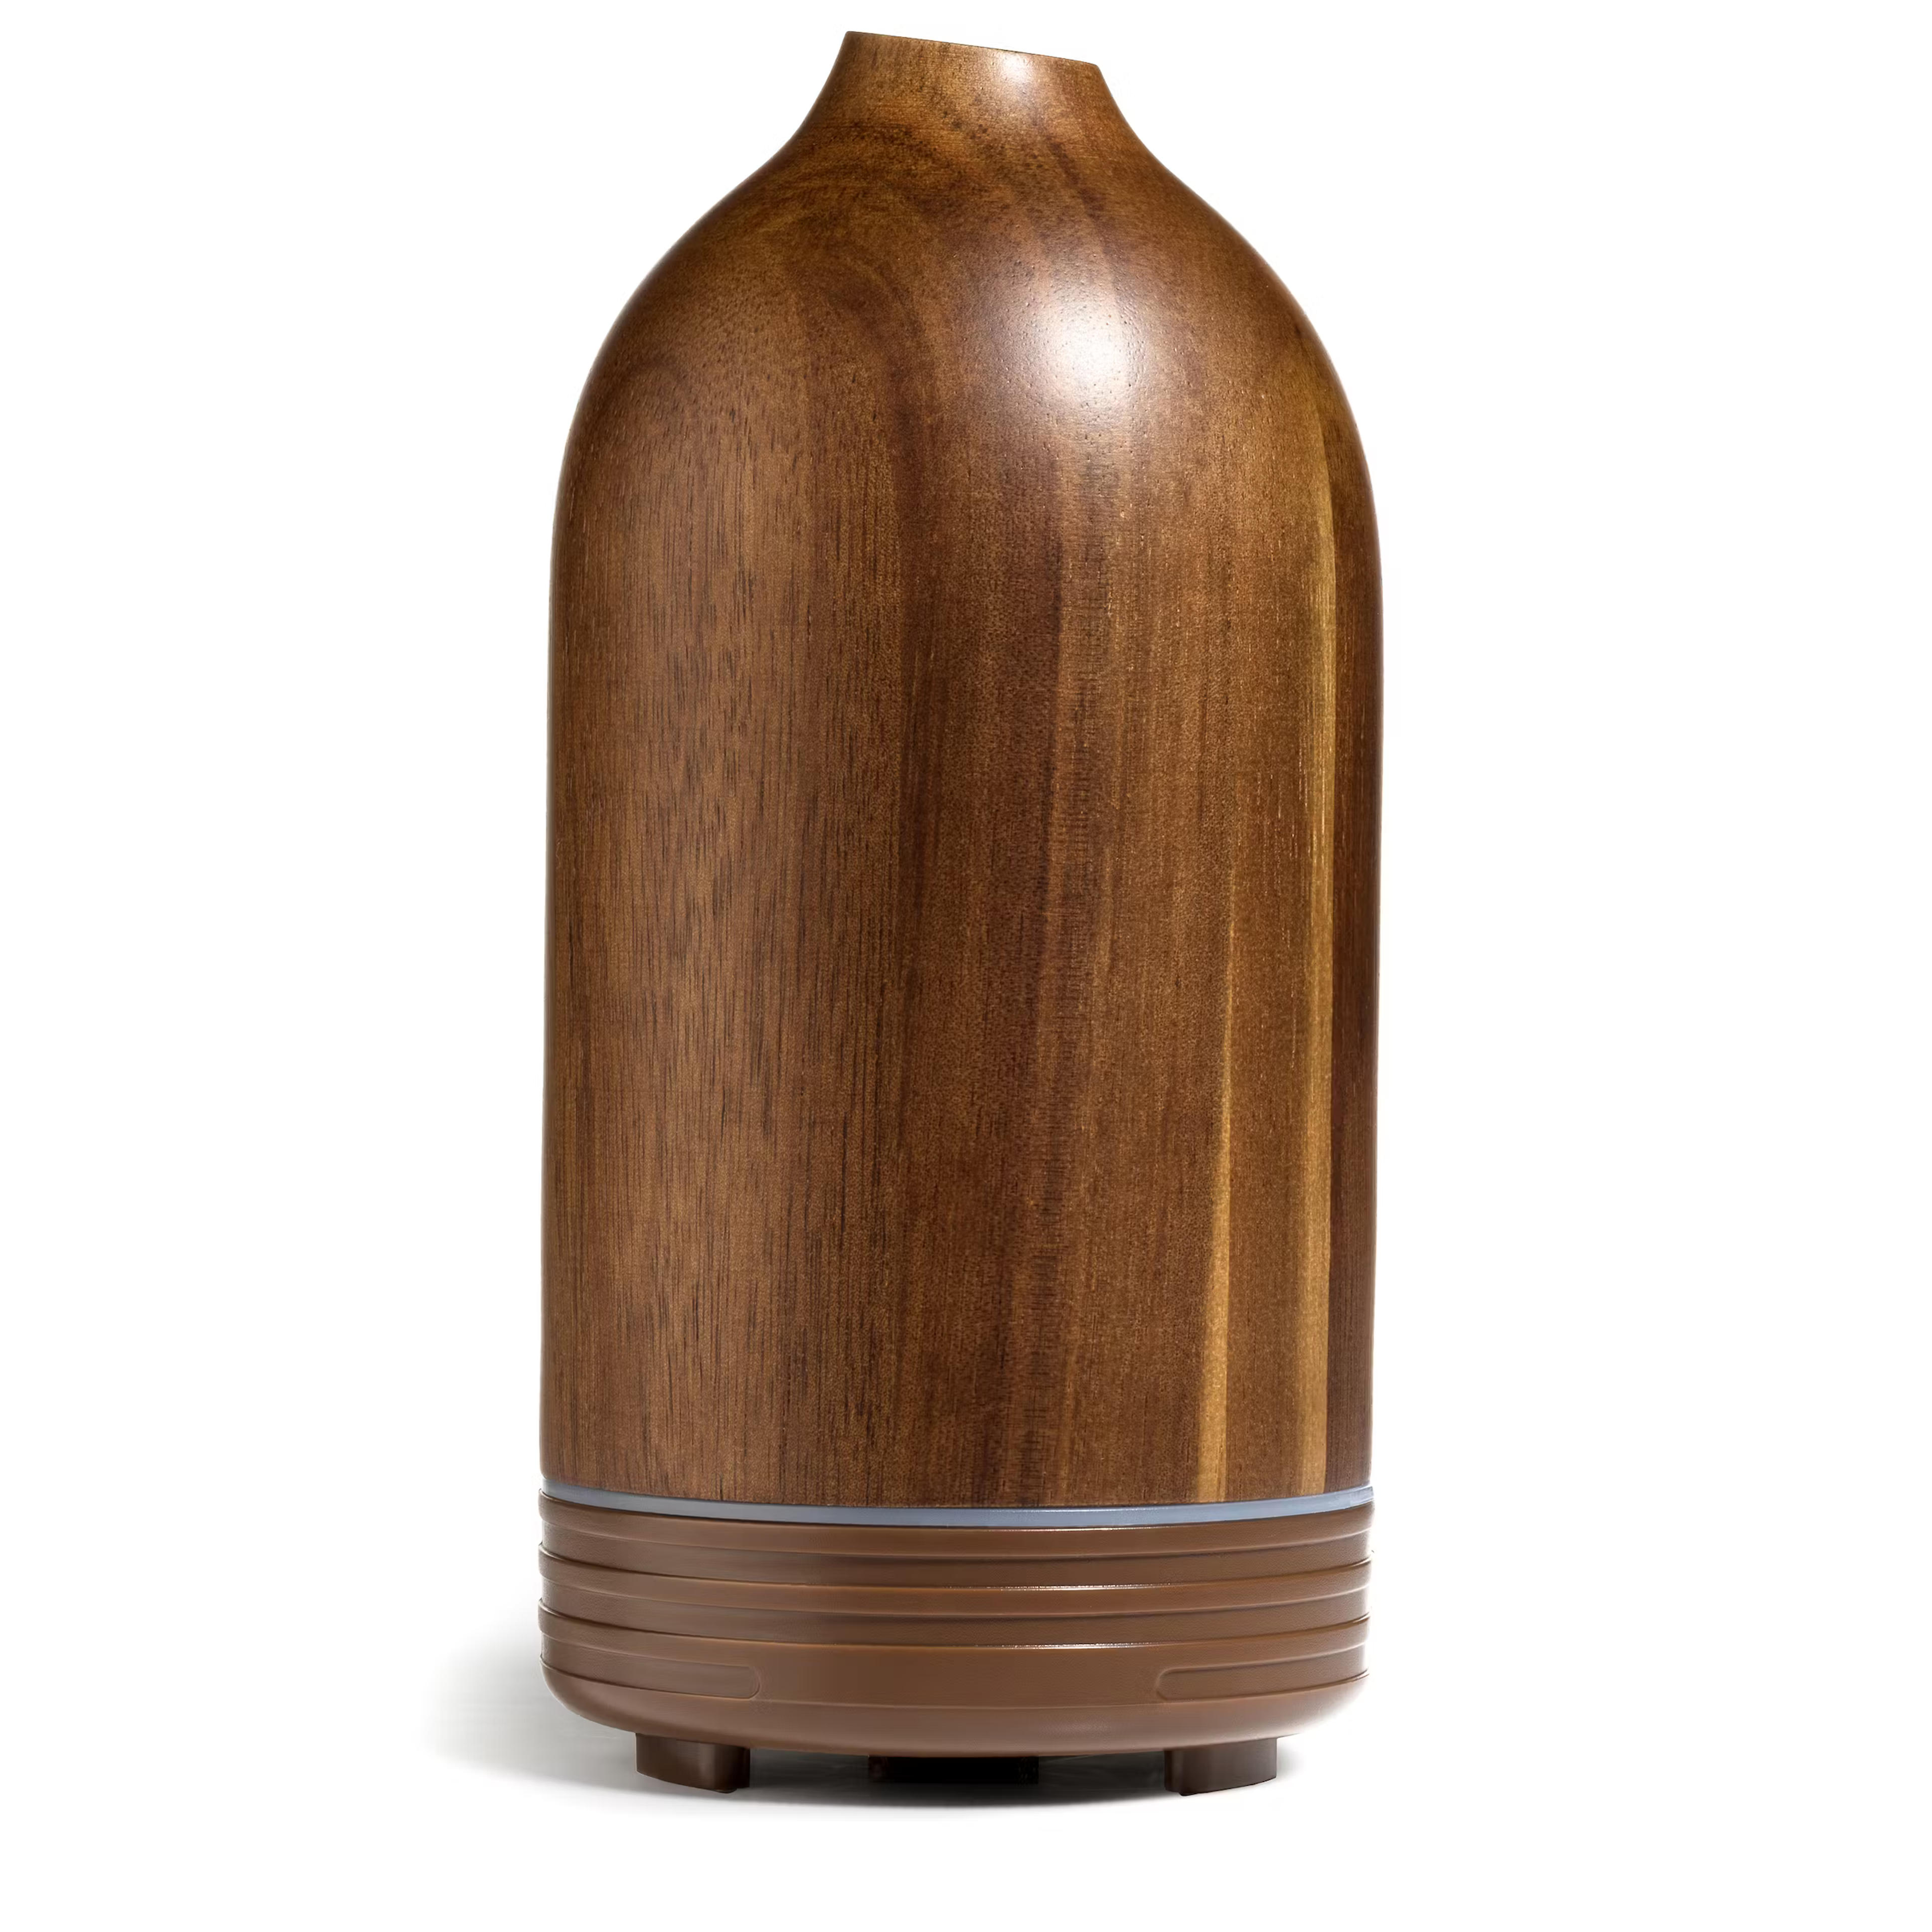 Campo Ultrasonic Essential Oil Diffuser - Natural Wood | Gifts | Huckberry